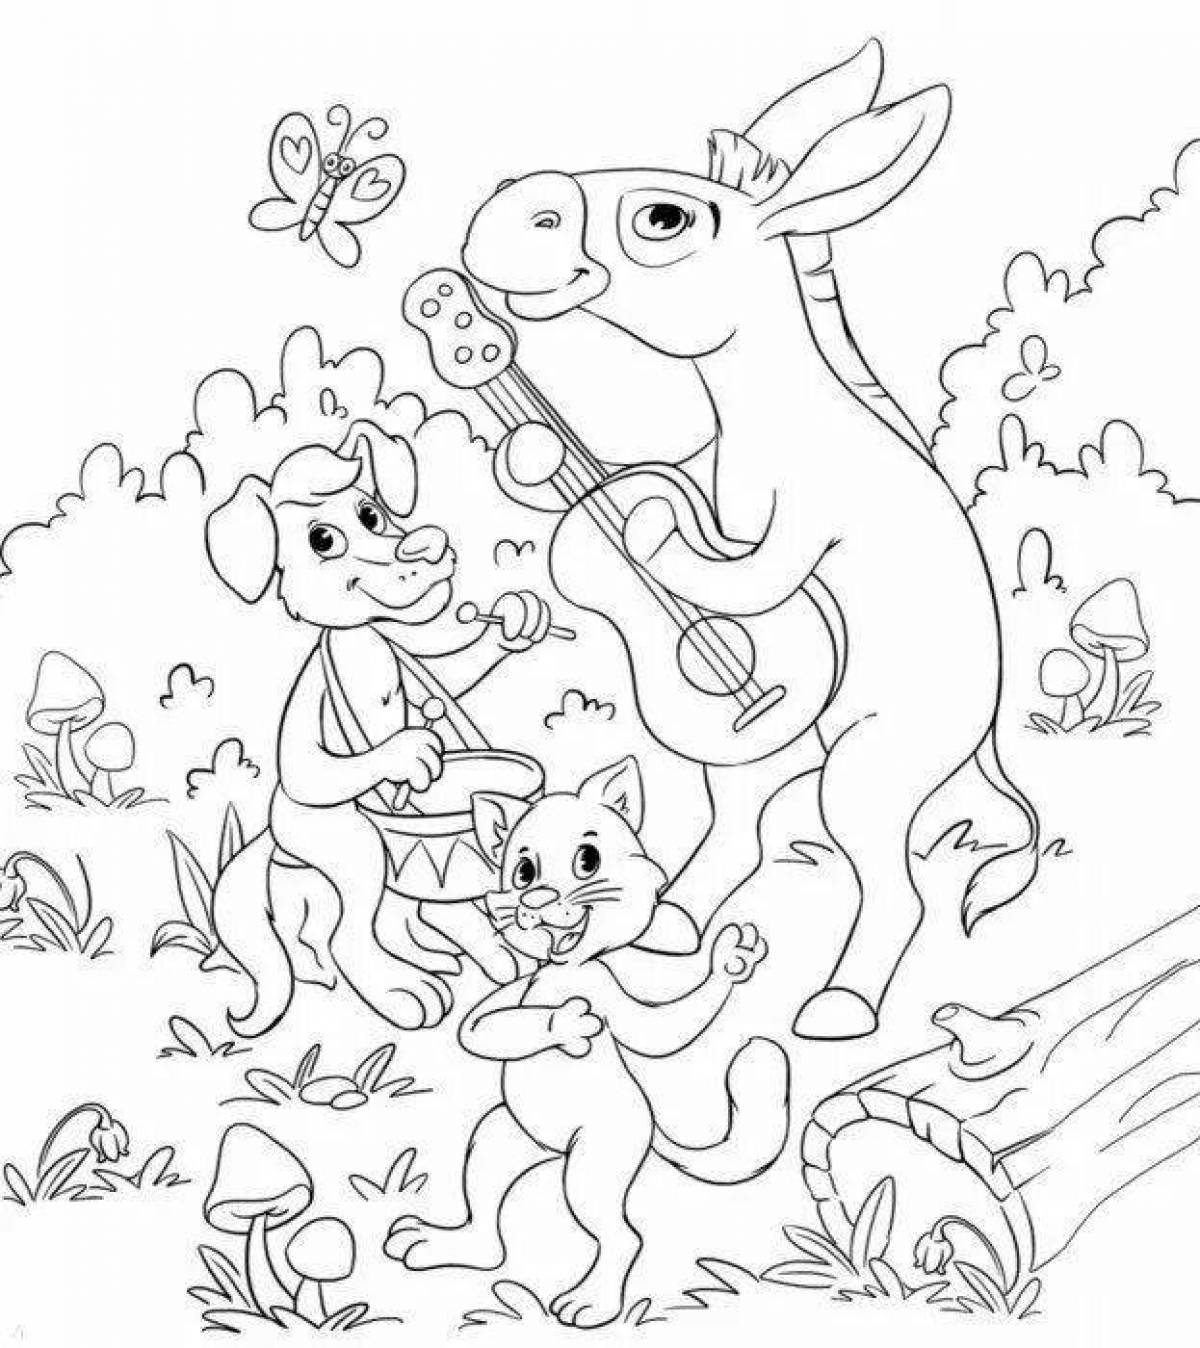 Fairy tale coloring book